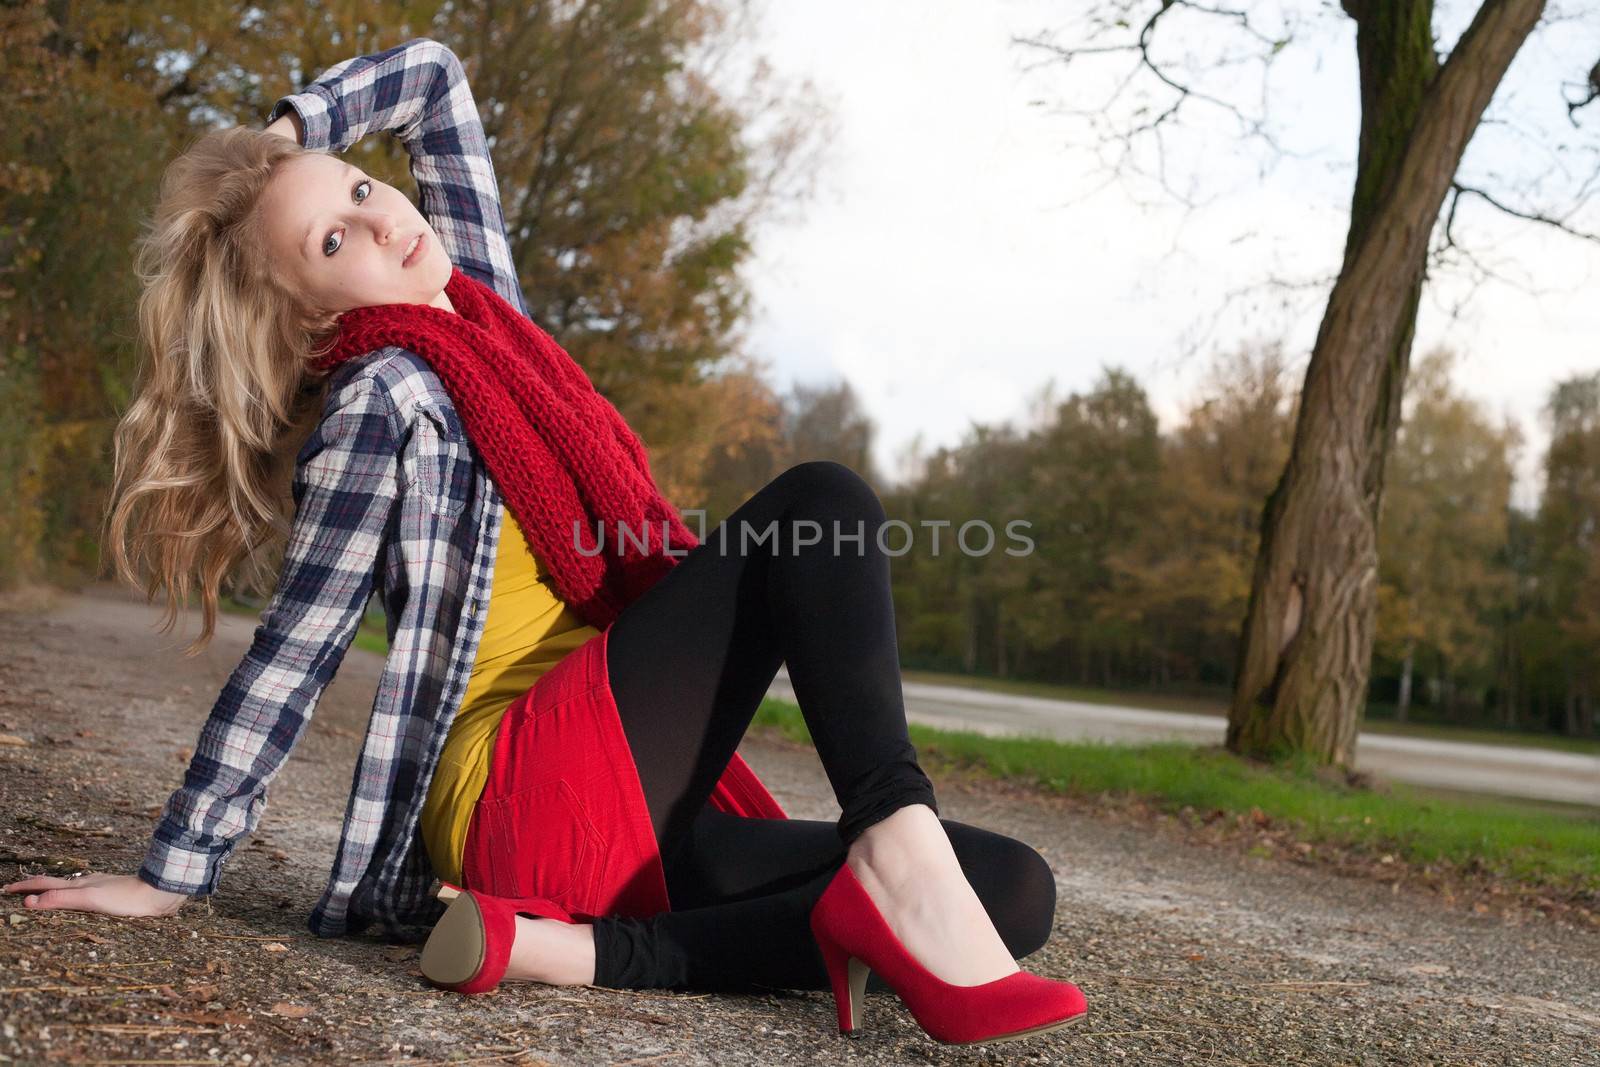 Sitting on the ground with red pumps by DNFStyle